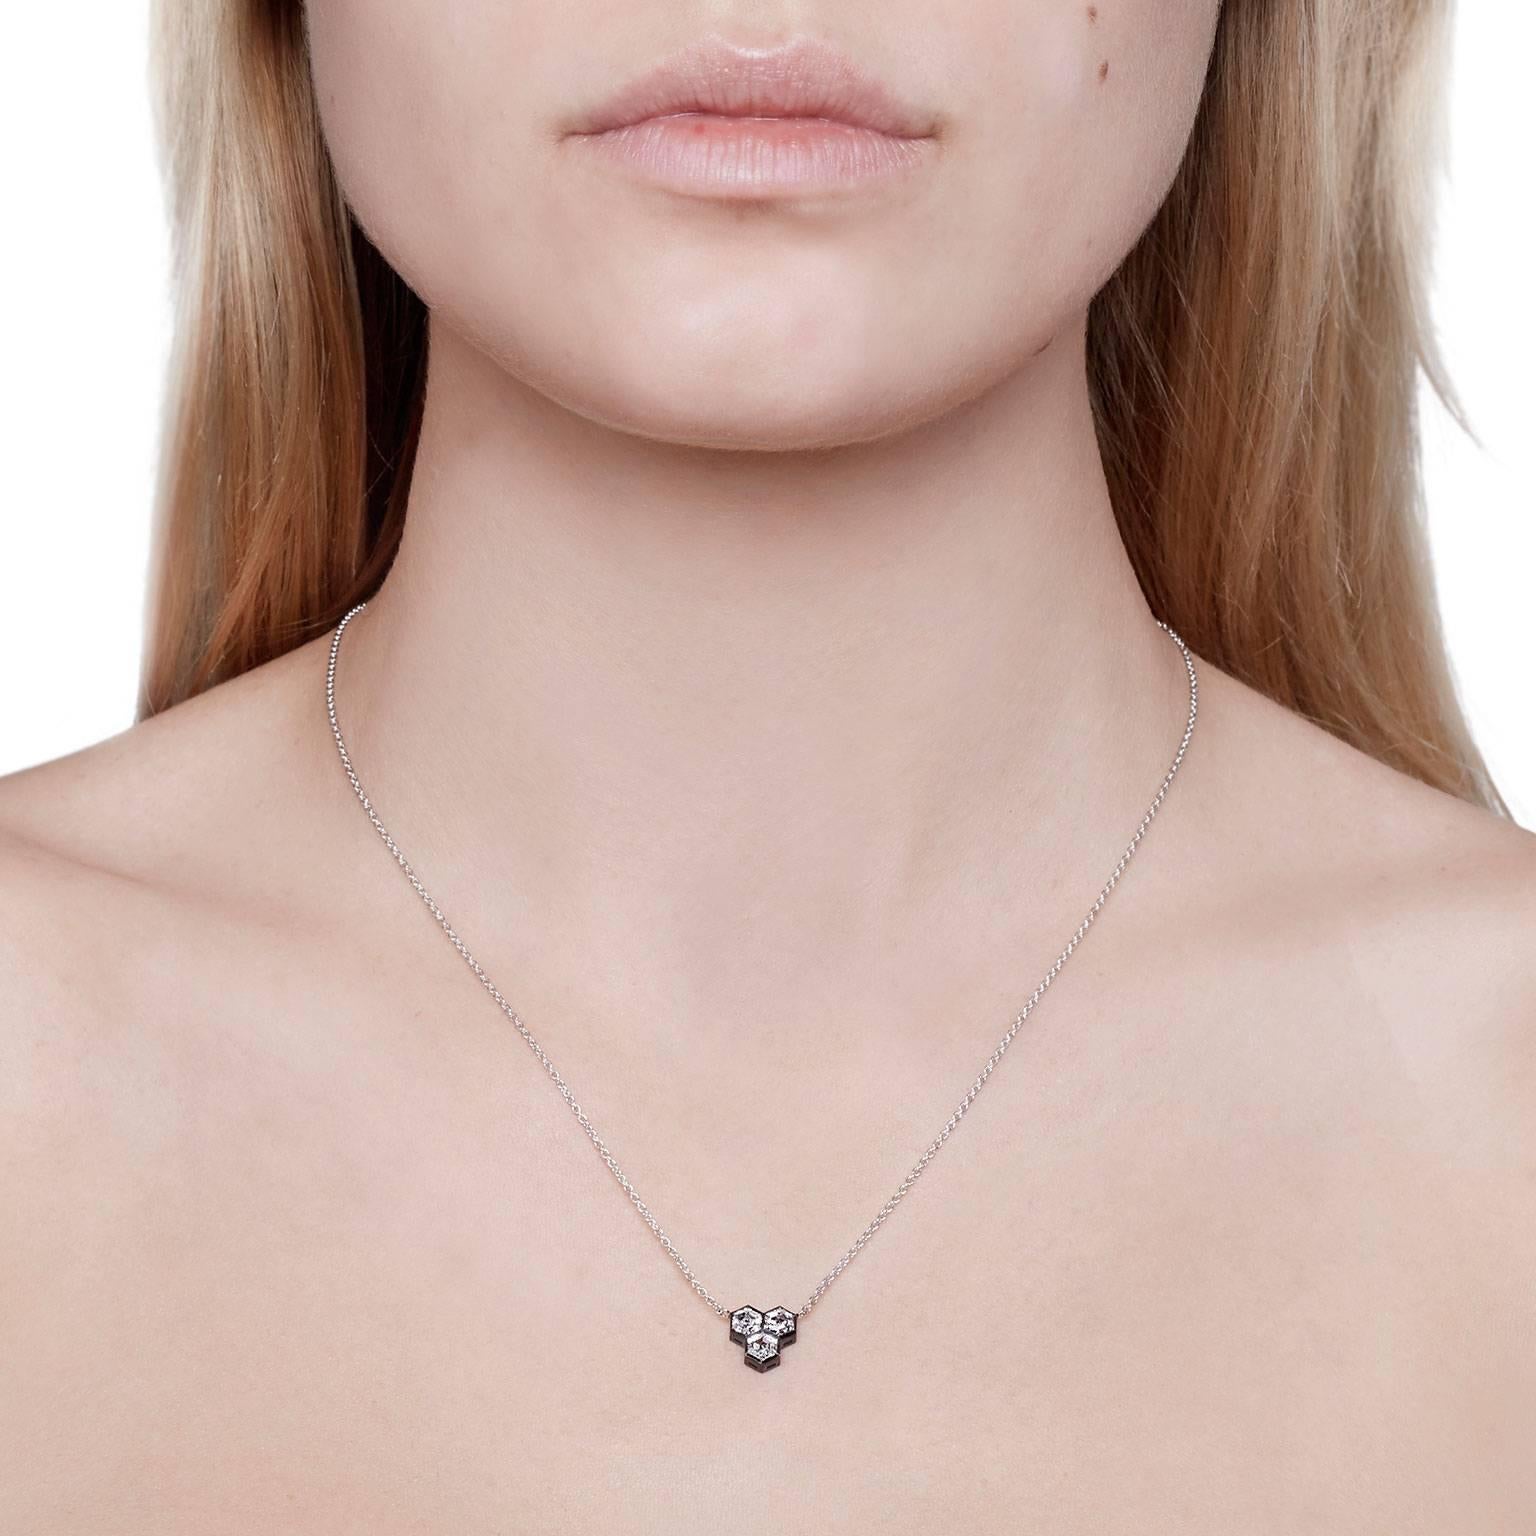 Geometric and Art Deco Style Design using rare and unique hexagon diamonds. The HONEYCOMB HEX pendant from Cushla Whiting's Celestial Collection is made in 18 carat white gold with black plating holding 3 hexagon shaped diamonds D-E VVS, total carat